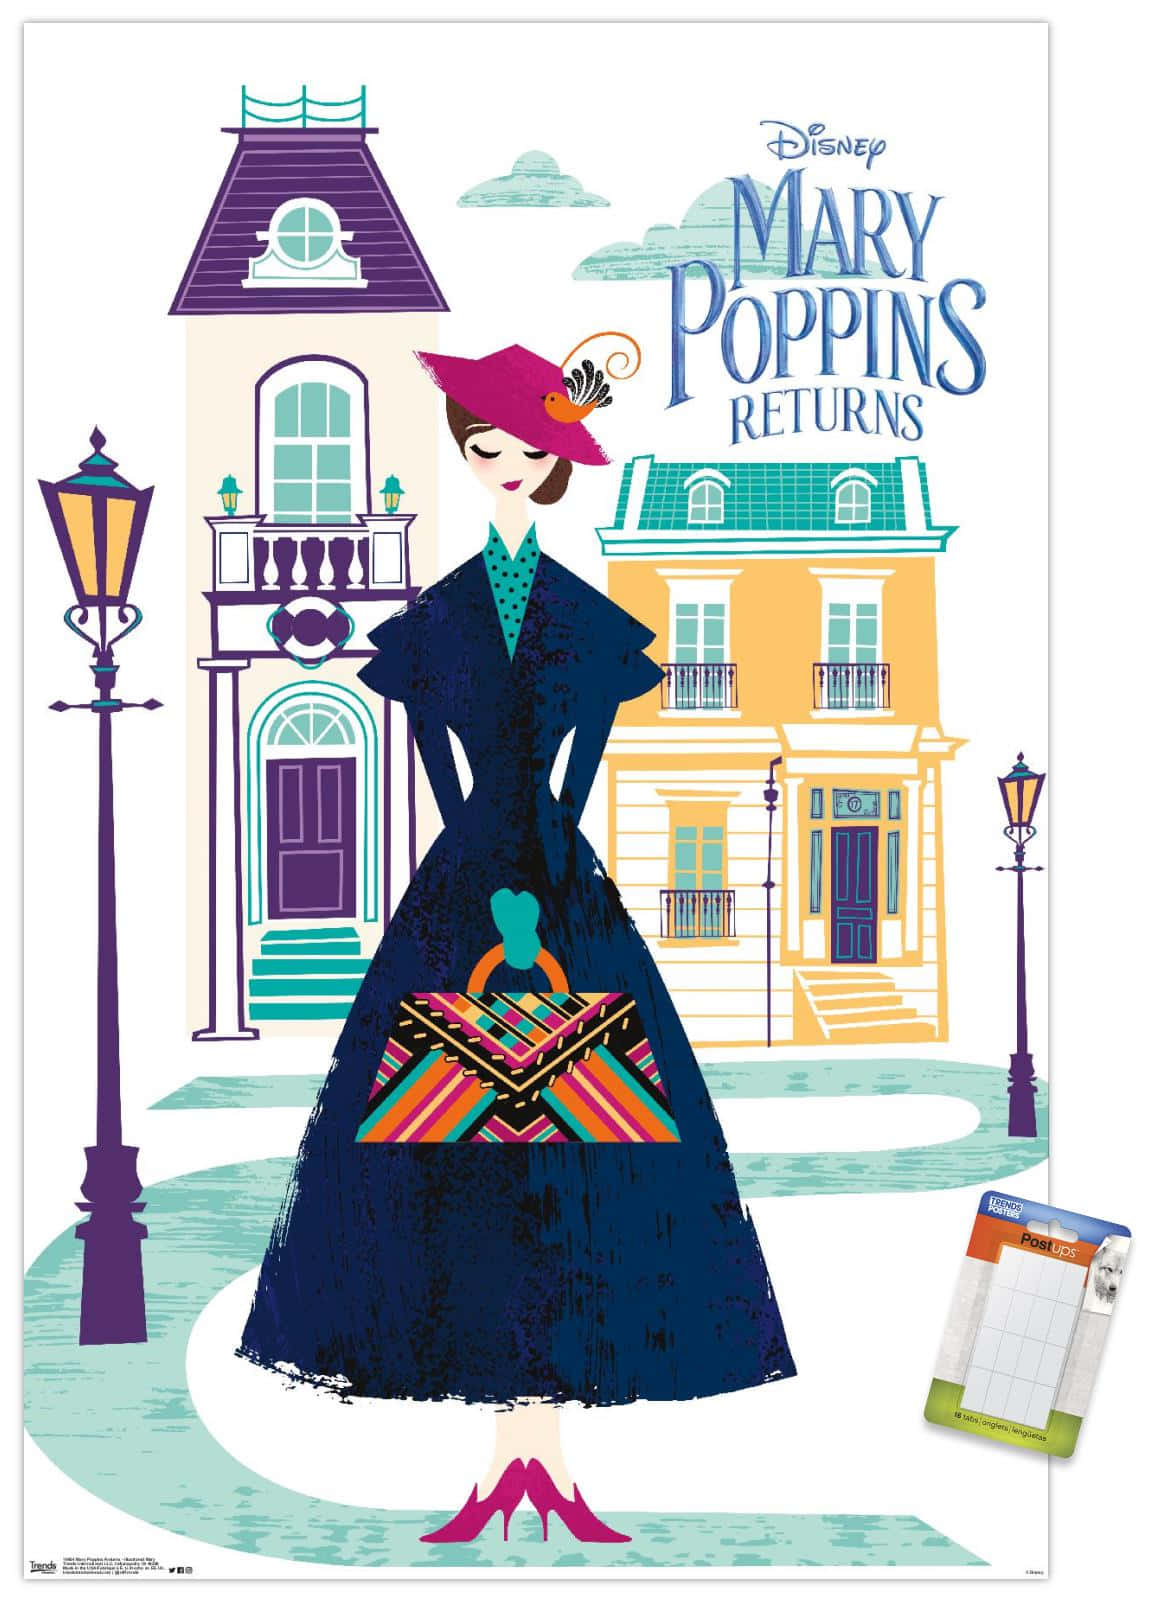 Magical Mary Poppins Ascending With Her Umbrella And Bag Background